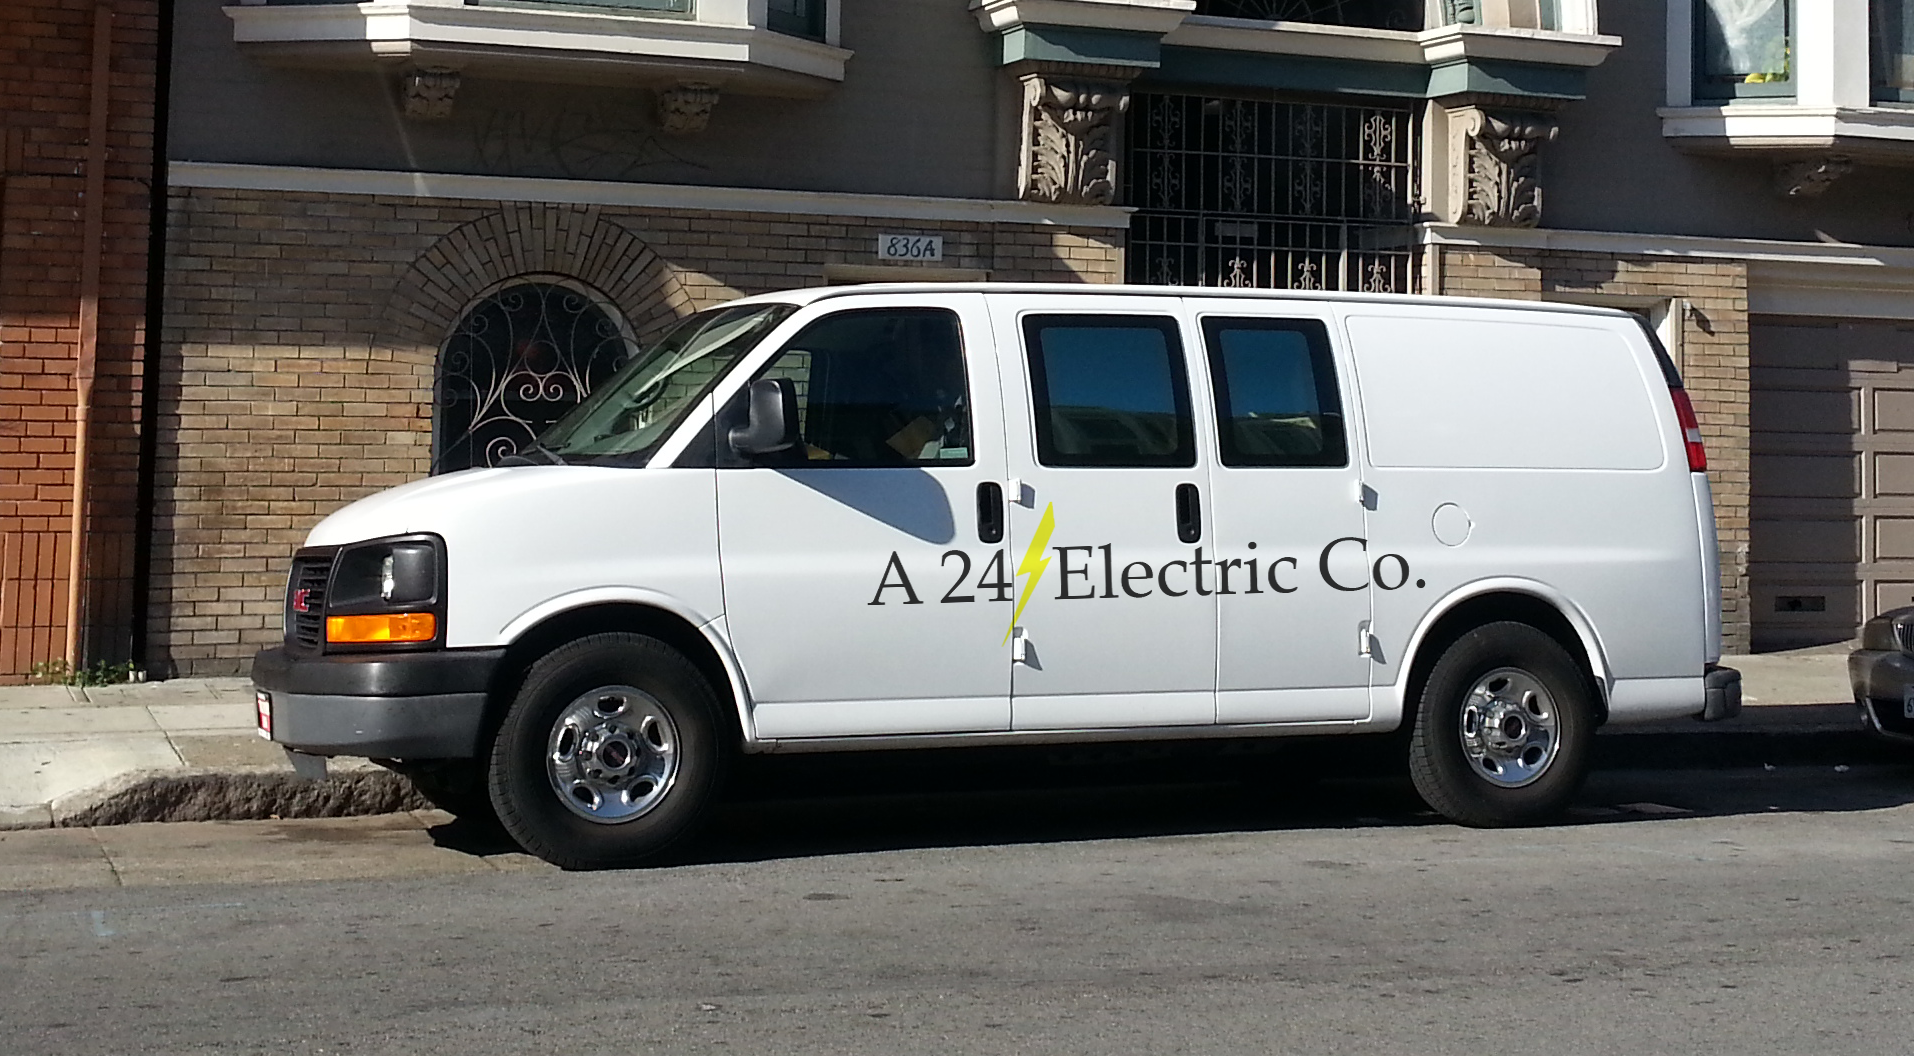 A work van used by an electrician in San Francisco, CA